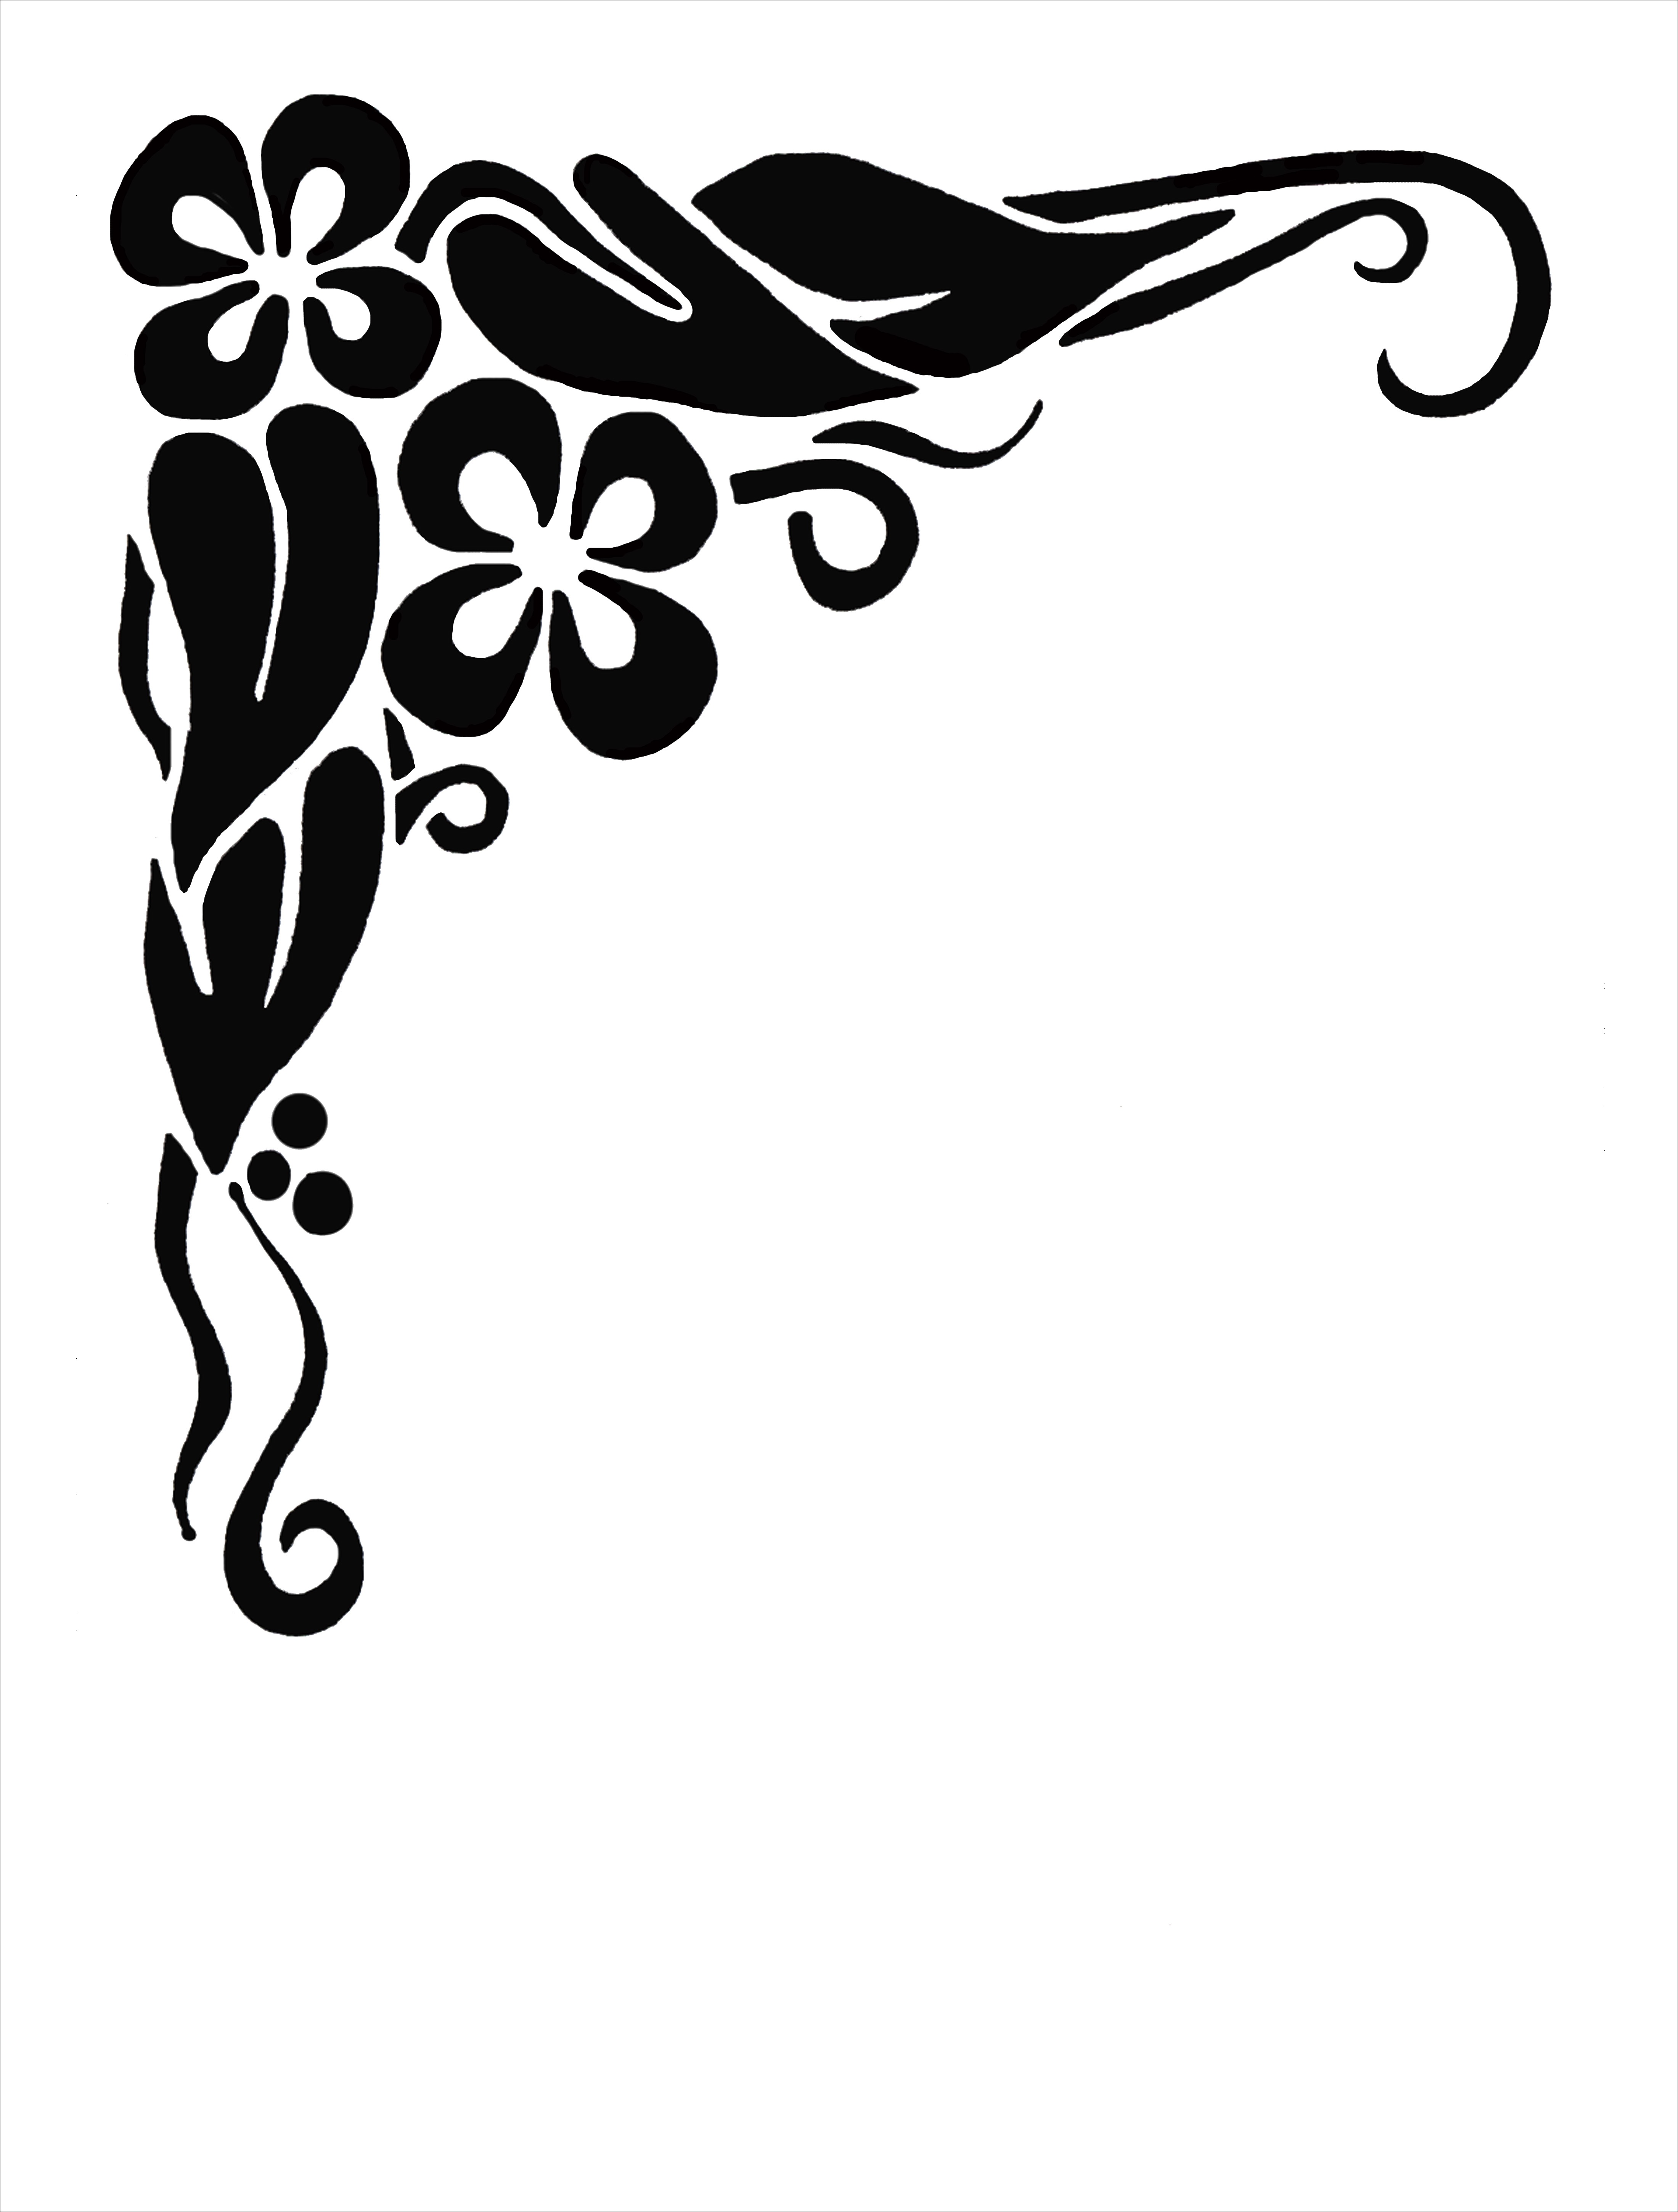 Black And White Flower Border Clipart | Free download on ClipArtMag